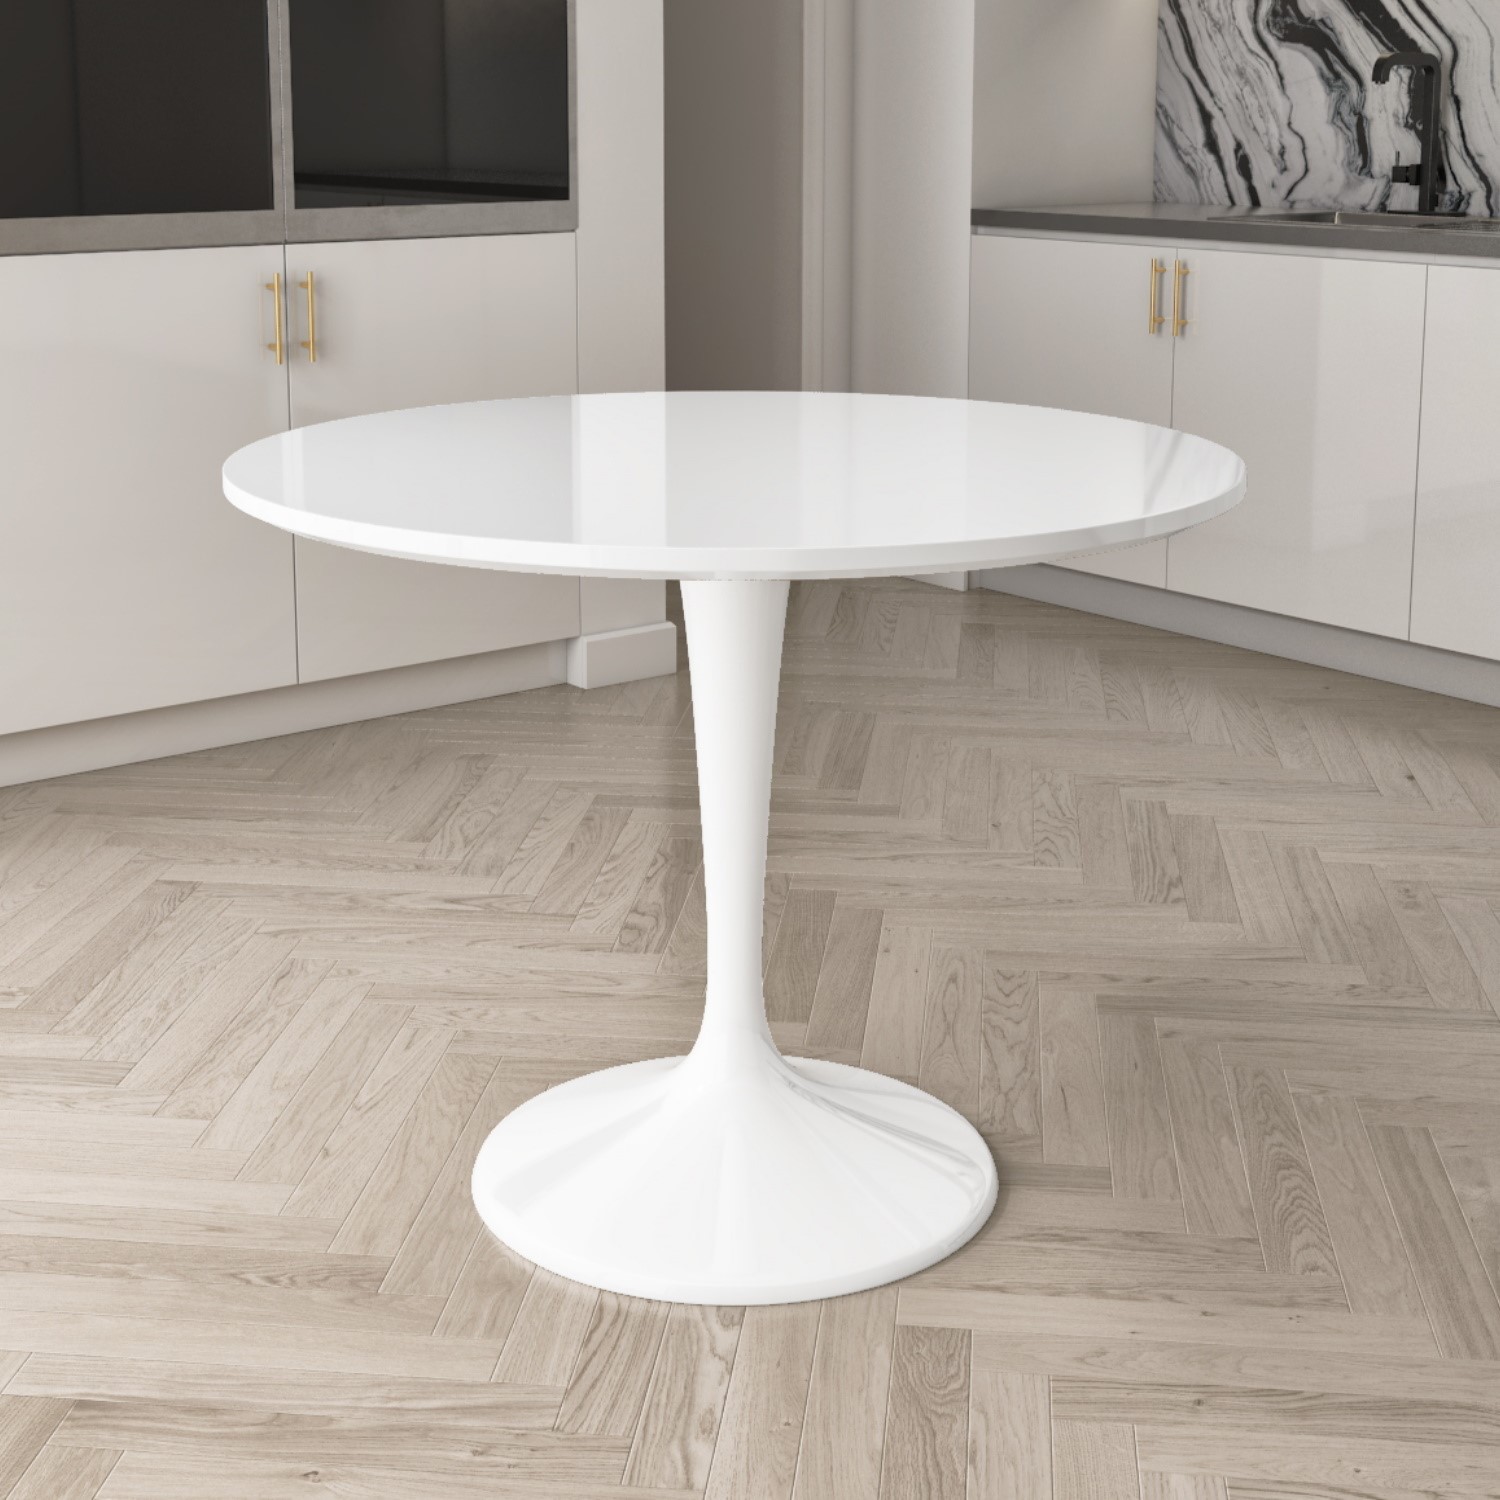 White Round High Gloss 100cm Dining, White Gloss Round Kitchen Table And Chairs